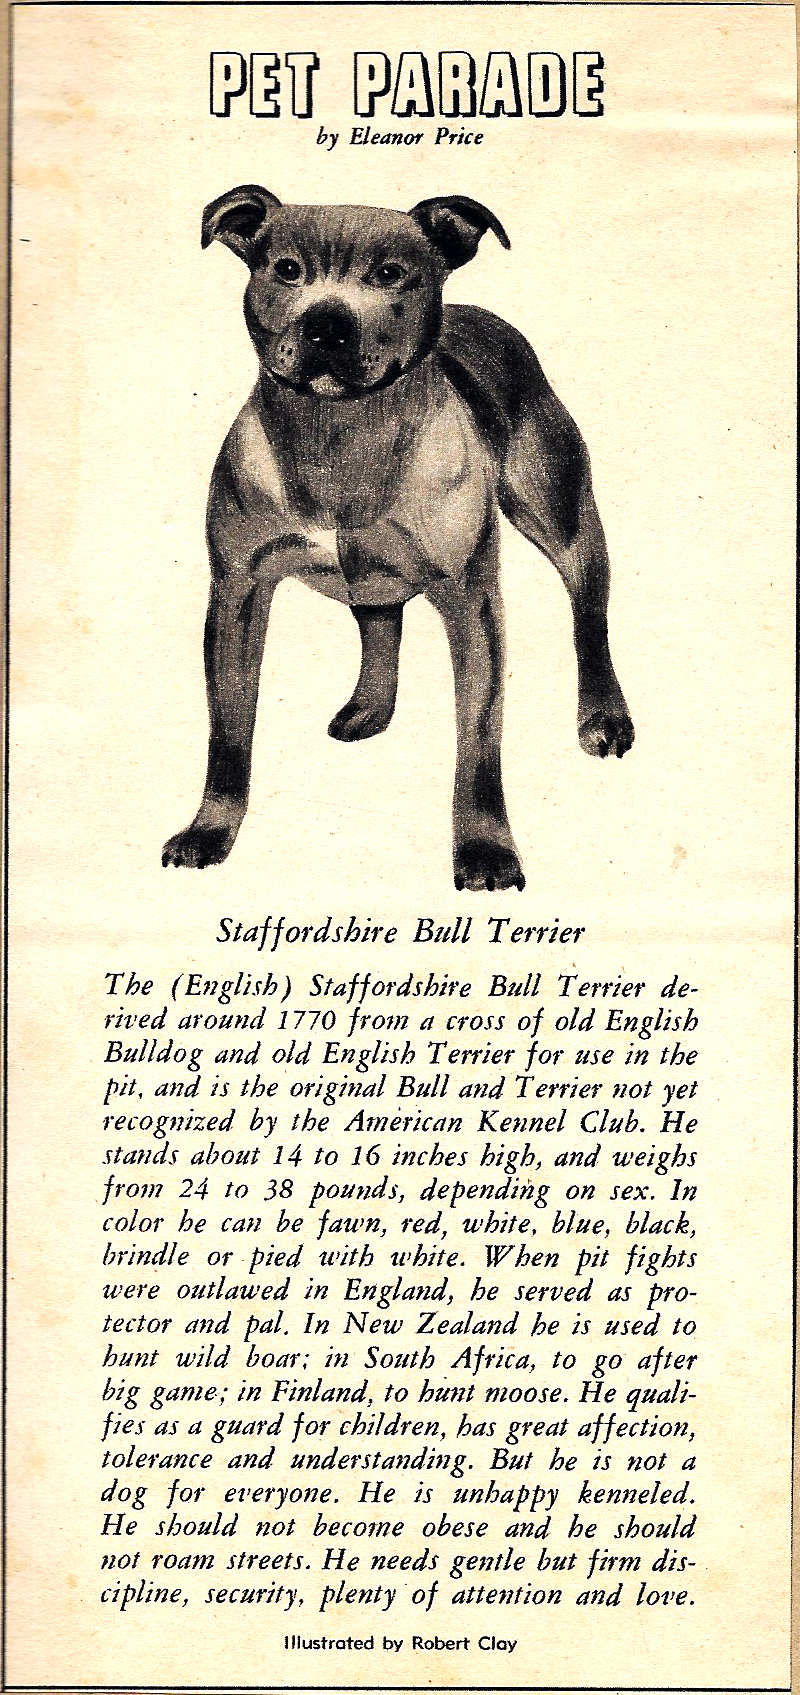 Pet Parade introducing the Staffordshire Bull Terrier.